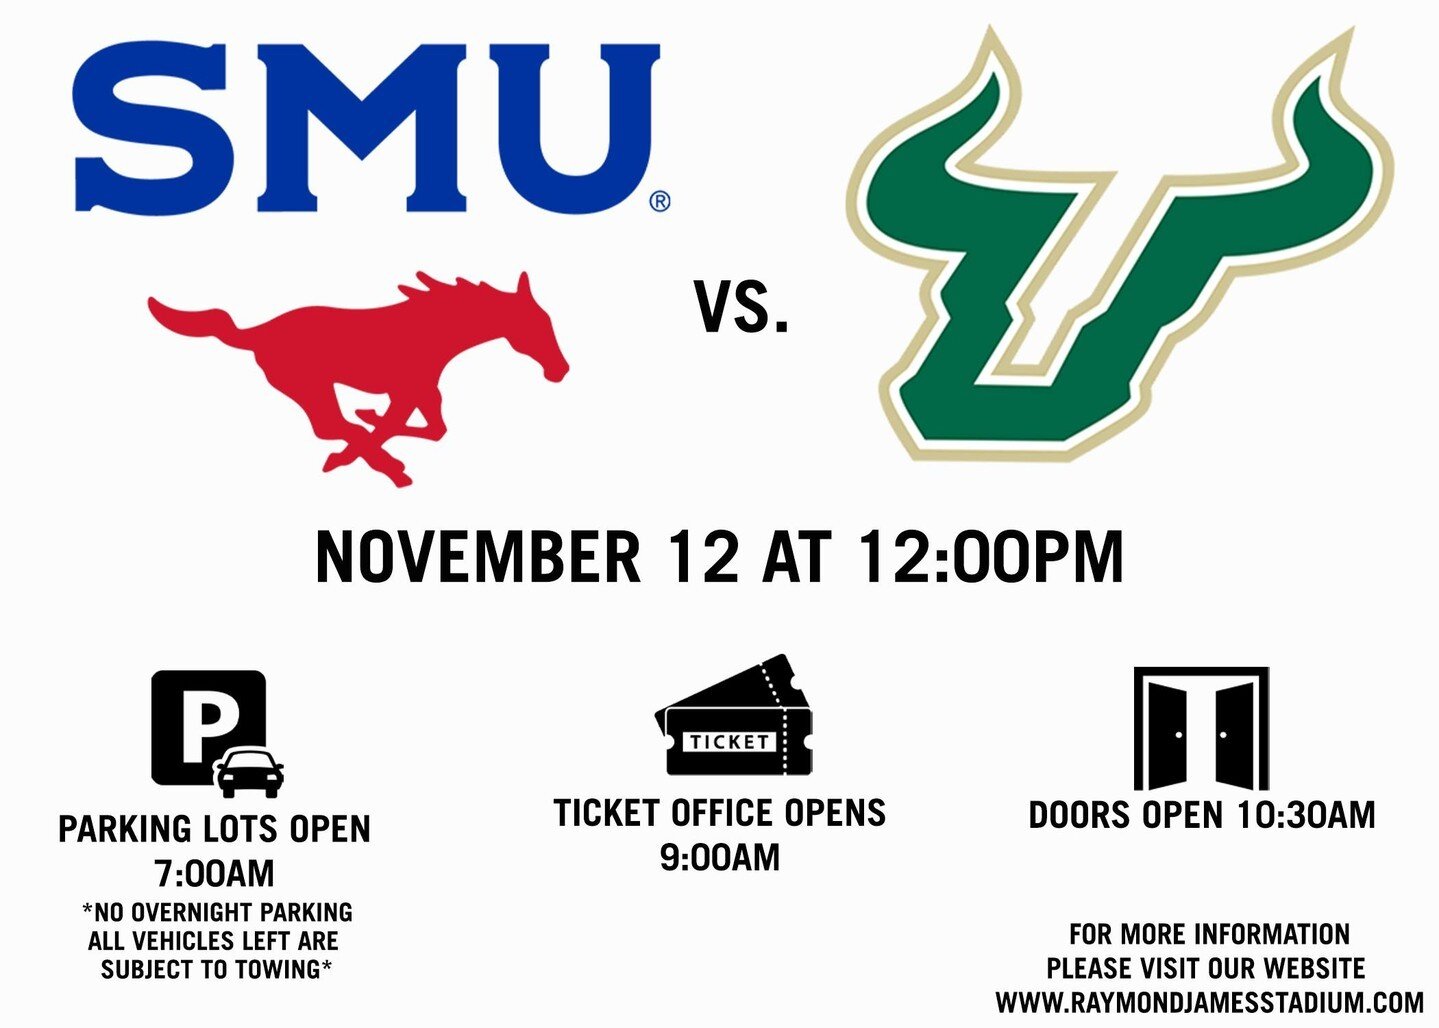 Know before you go to SMU vs. USF today!